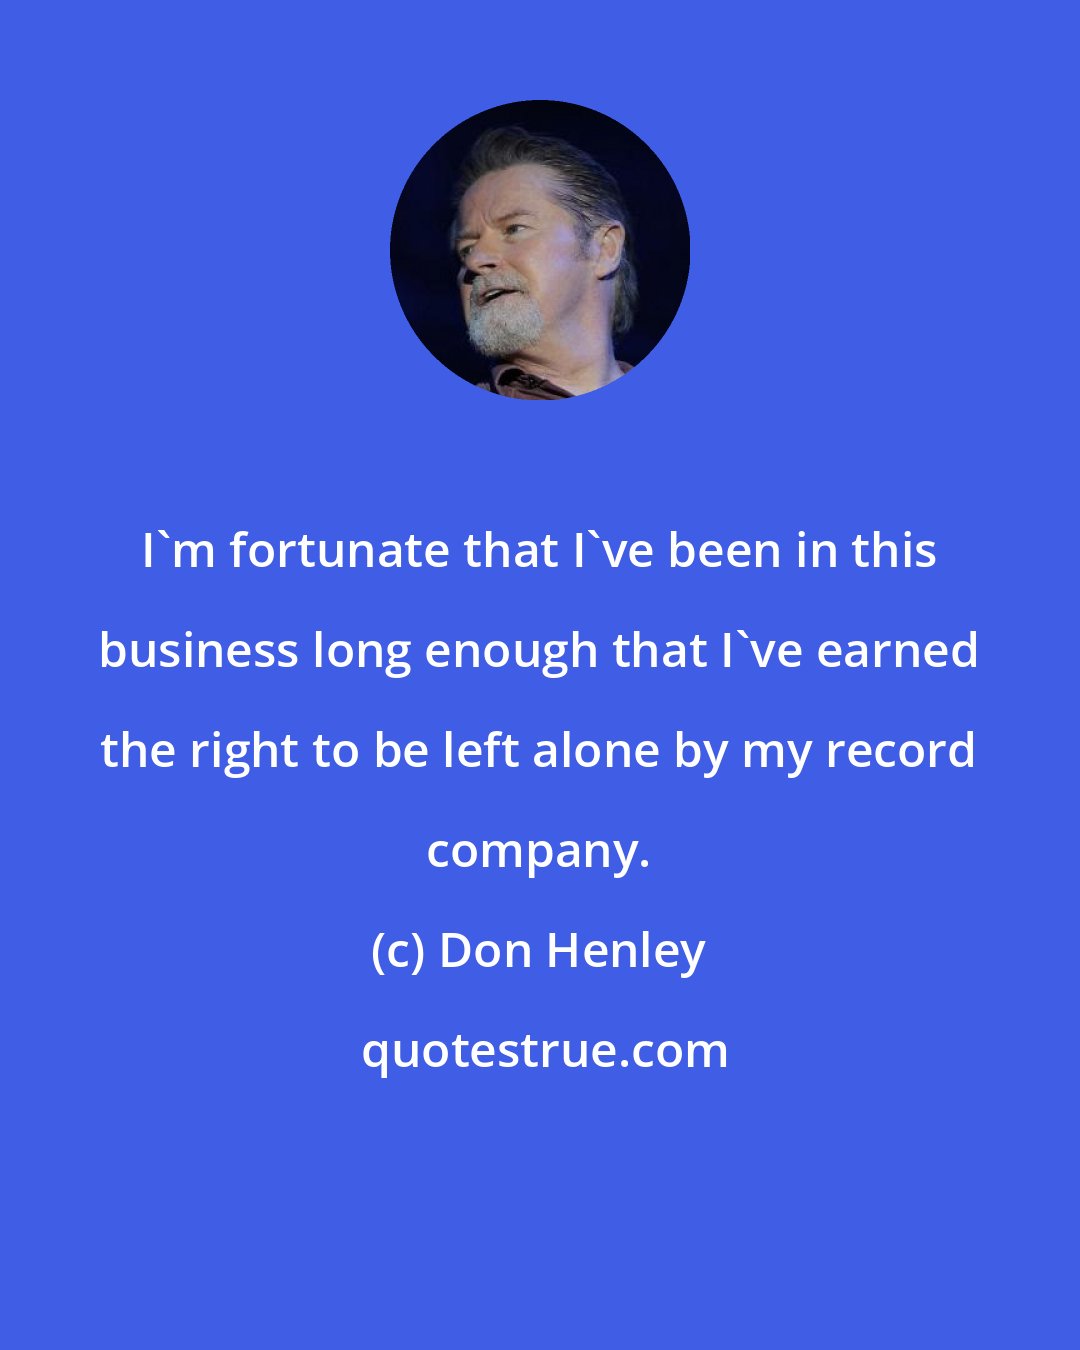 Don Henley: I'm fortunate that I've been in this business long enough that I've earned the right to be left alone by my record company.